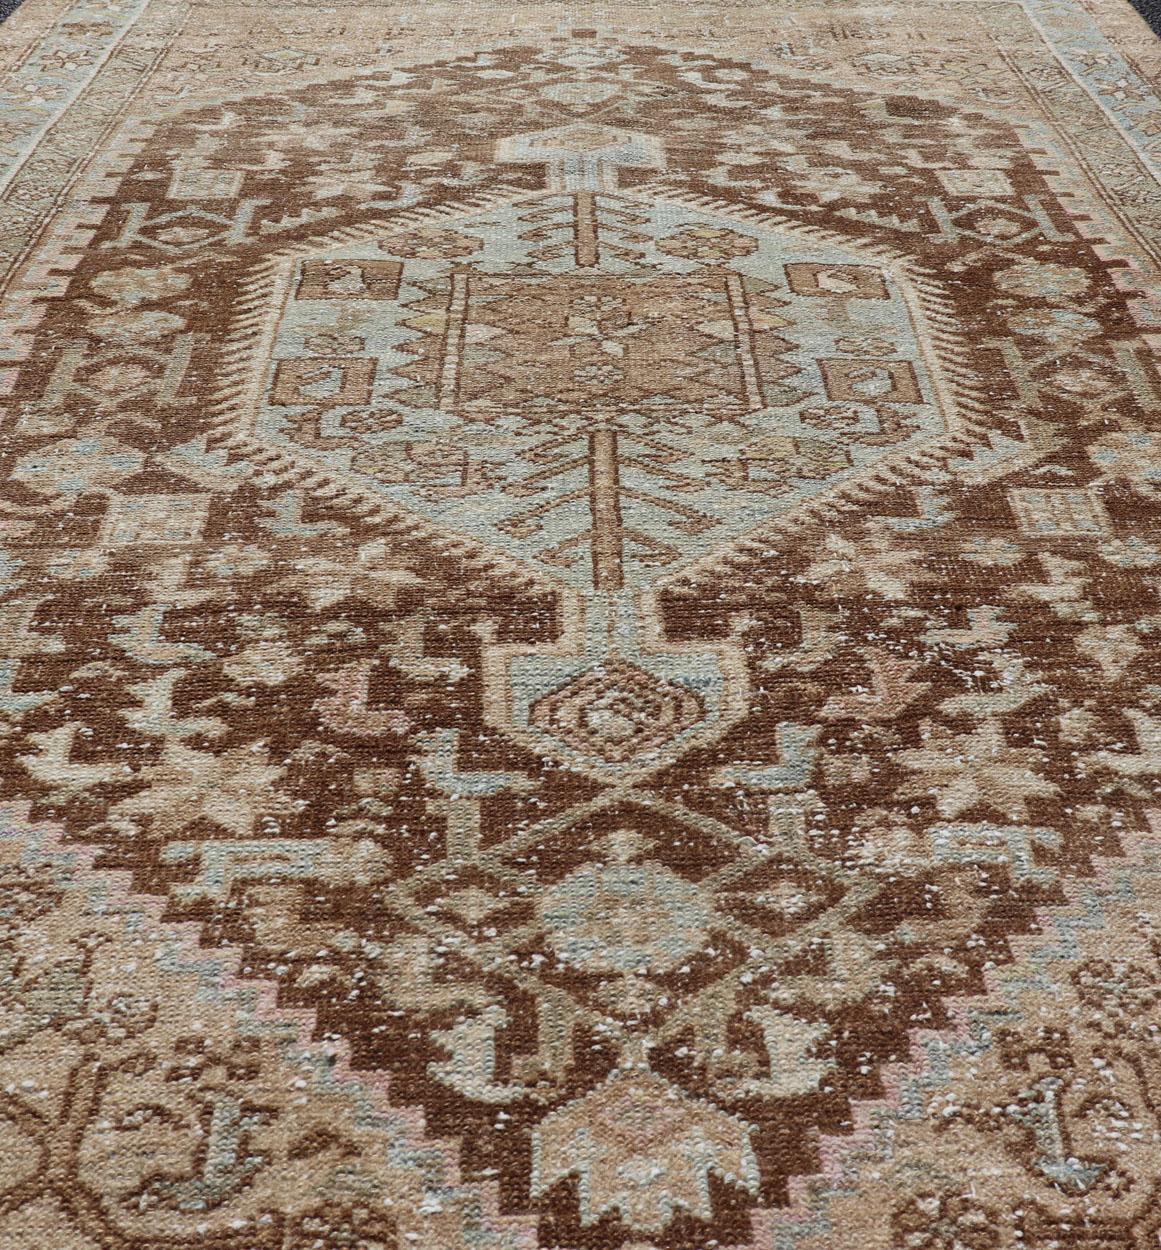 Earthy Tone Antique Persian Hamadan Rug with Medallion Design in Brown and Blue For Sale 2